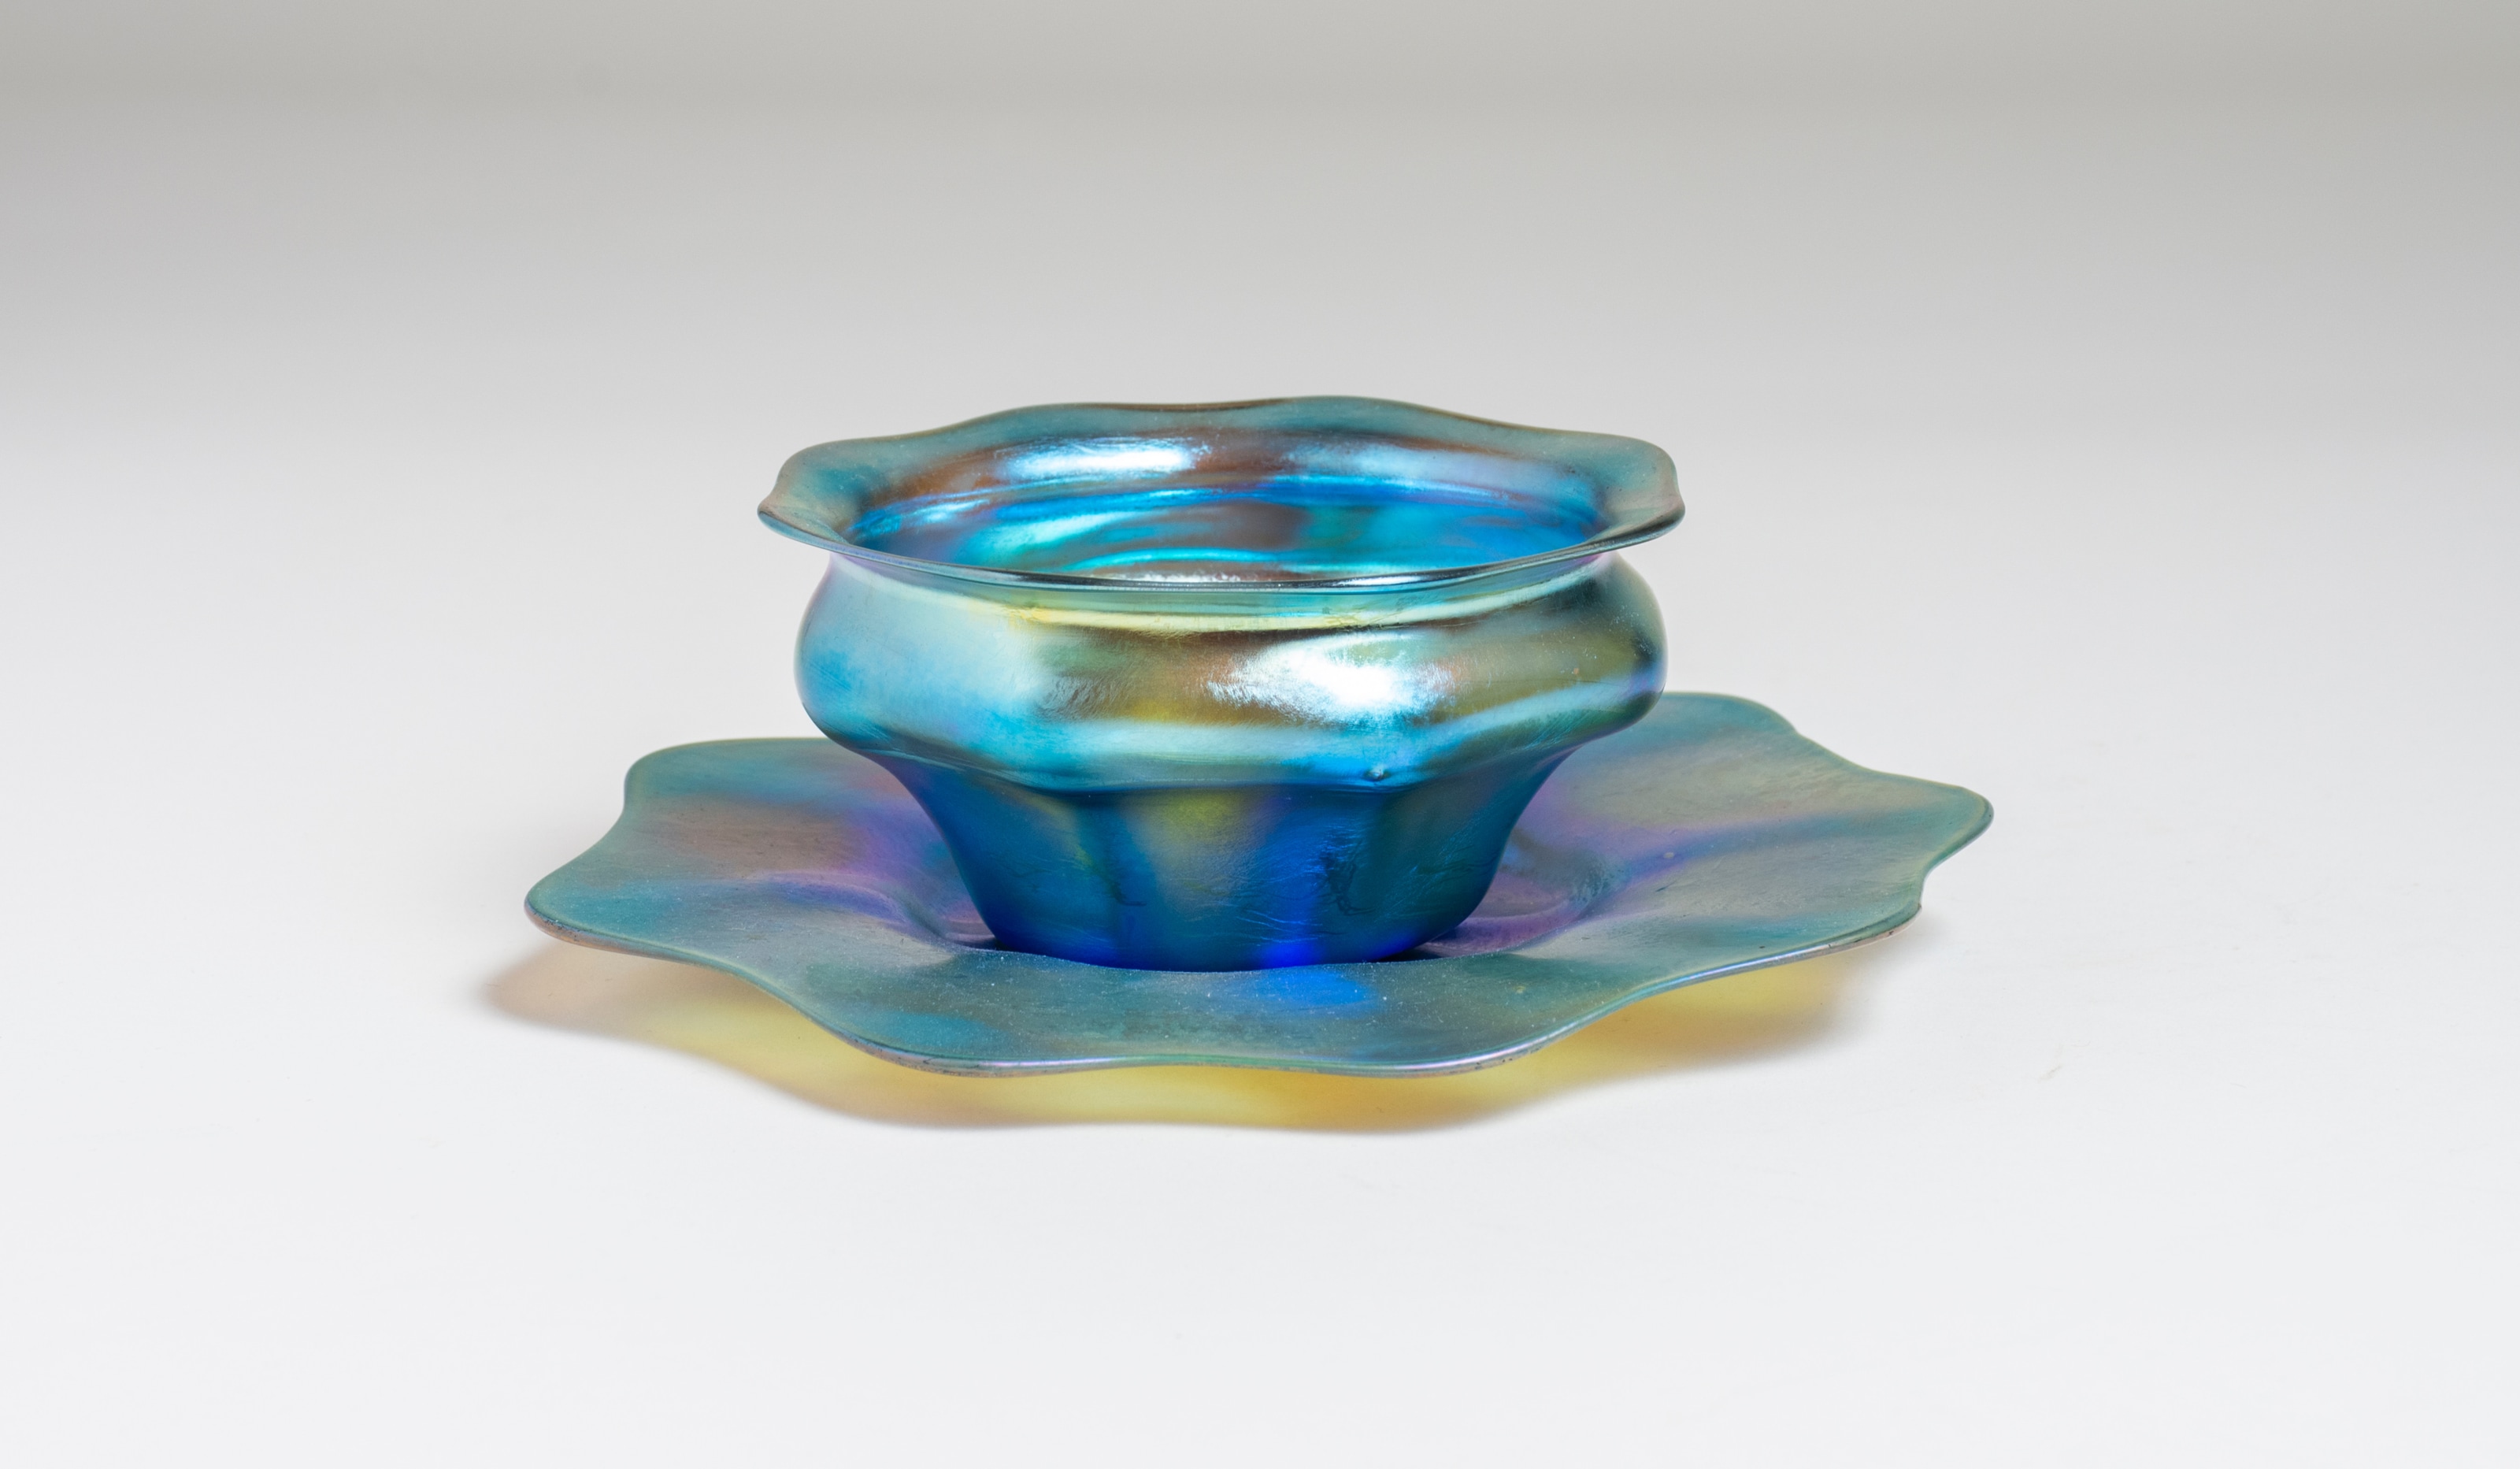 a blue iridescent favrile glass finger bowl and underplate by tiffany studios, the underplate in extremely thin ribbed glass with a waving edge, the small ribbed bowl in matching blue glass fitting into the plate at the center.